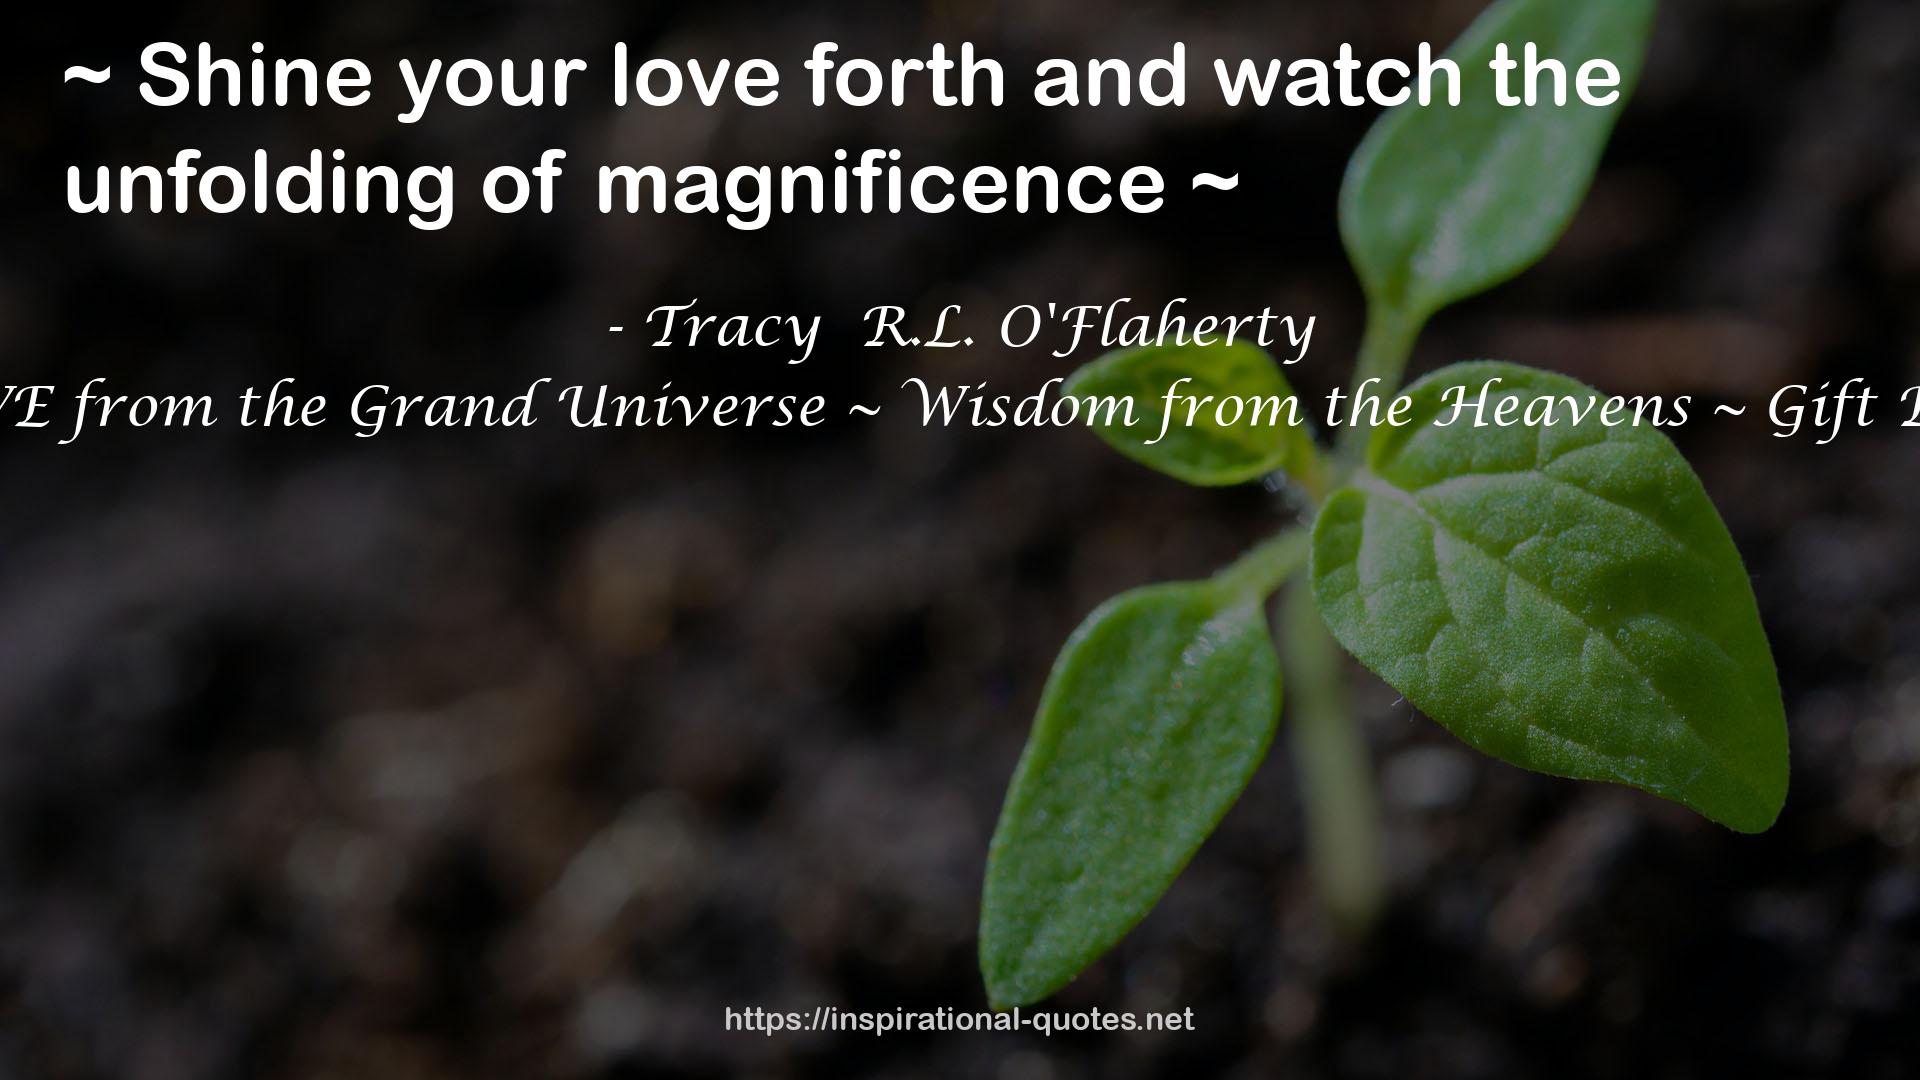 LOVE from the Grand Universe ~ Wisdom from the Heavens ~ Gift Book QUOTES